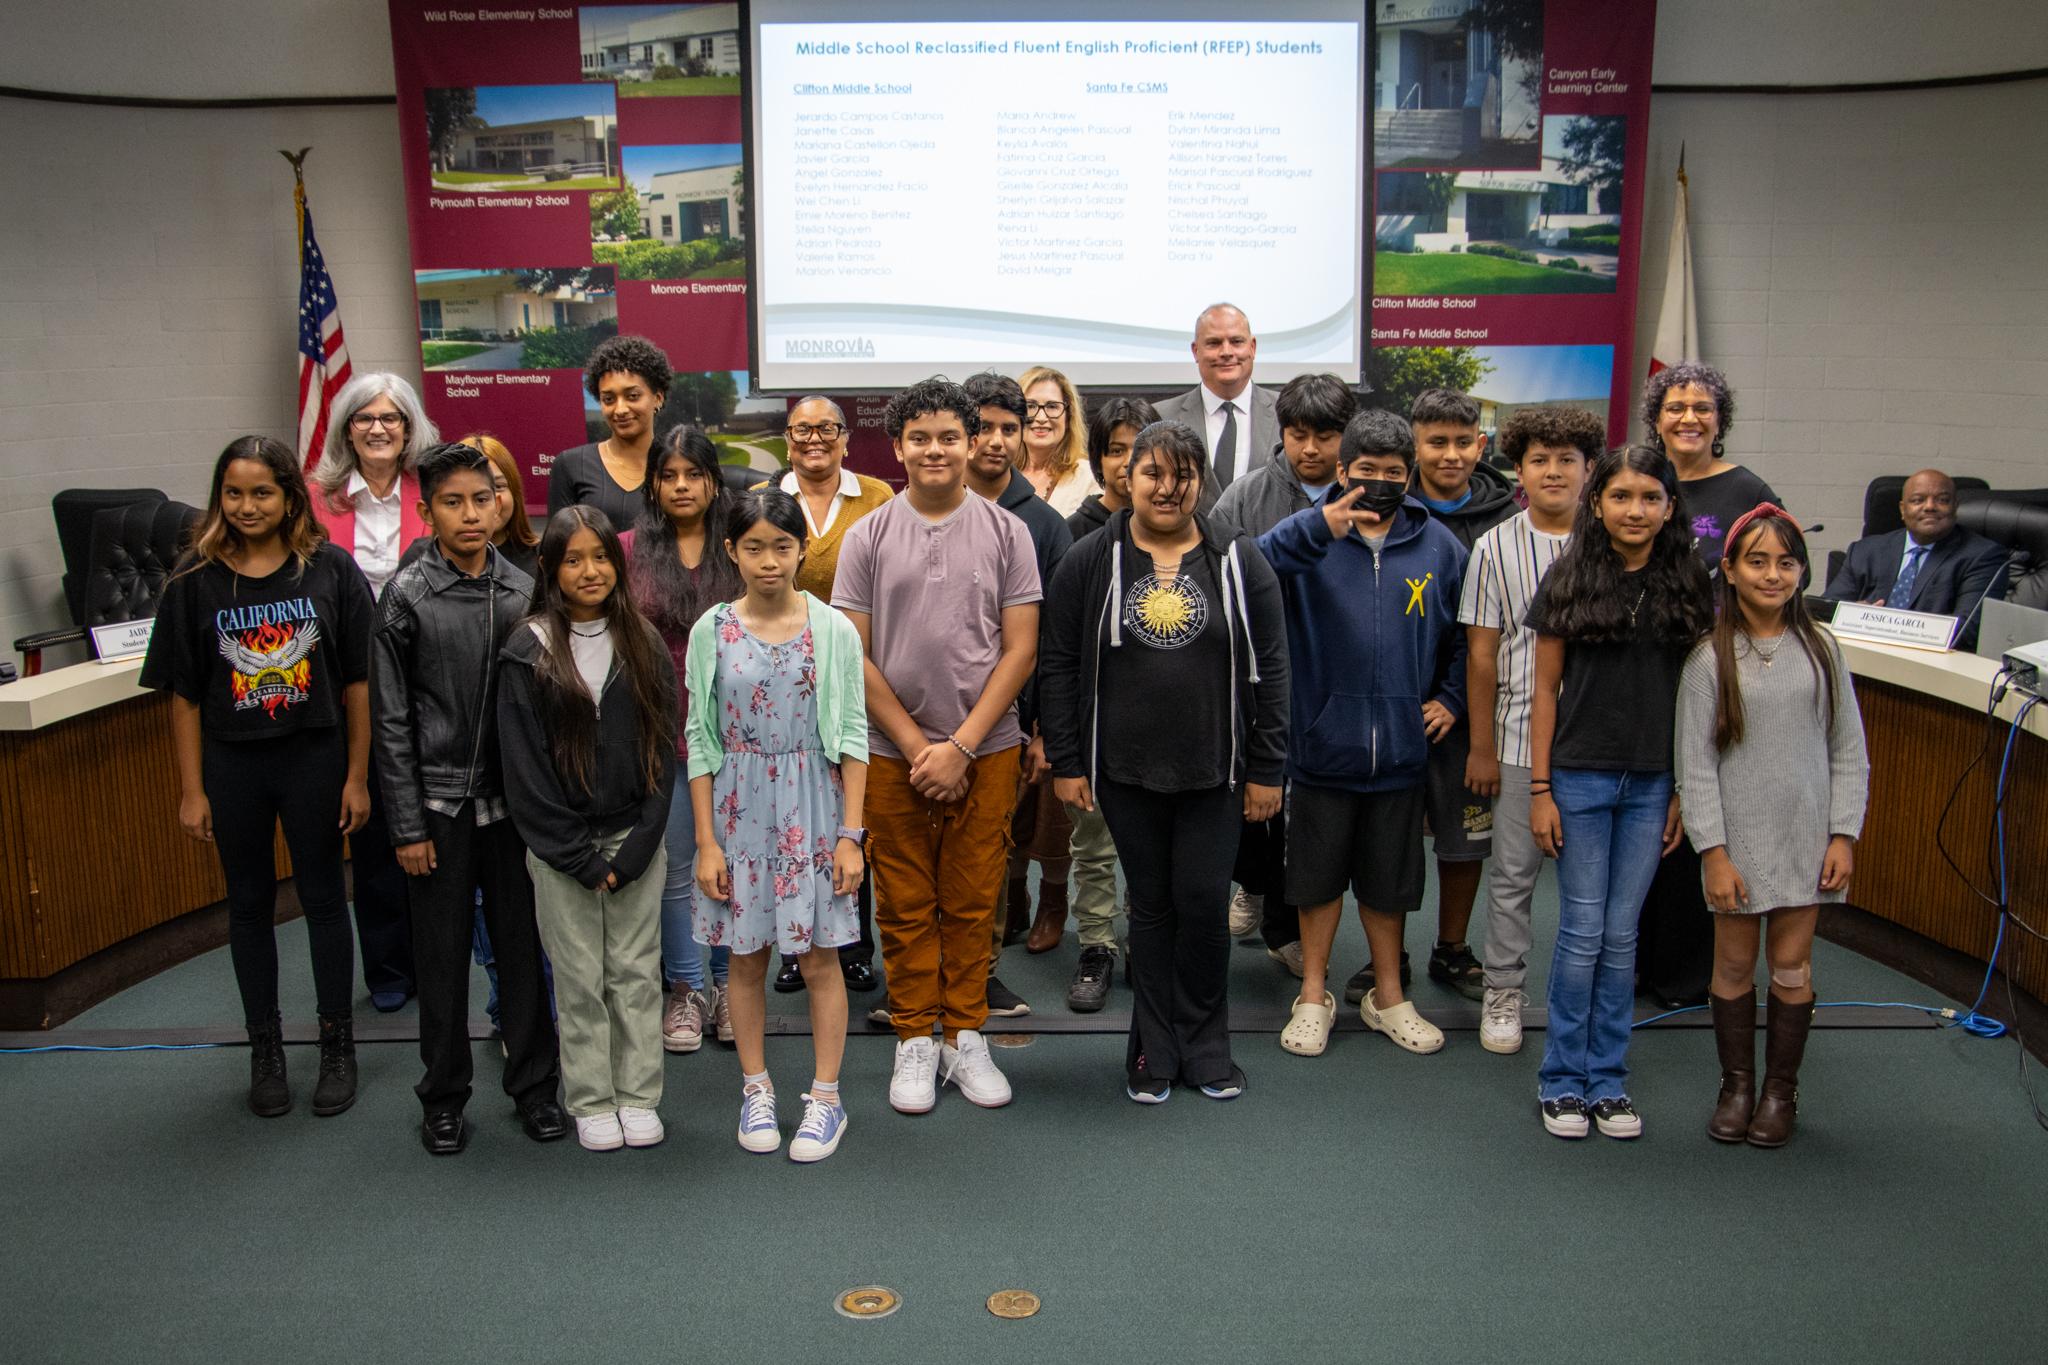 Our students took center stage at the latest board meeting as we celebrated their incredible milestone: reclassification from English learner (EL) status to Fluent English Proficient (RFEP) status.